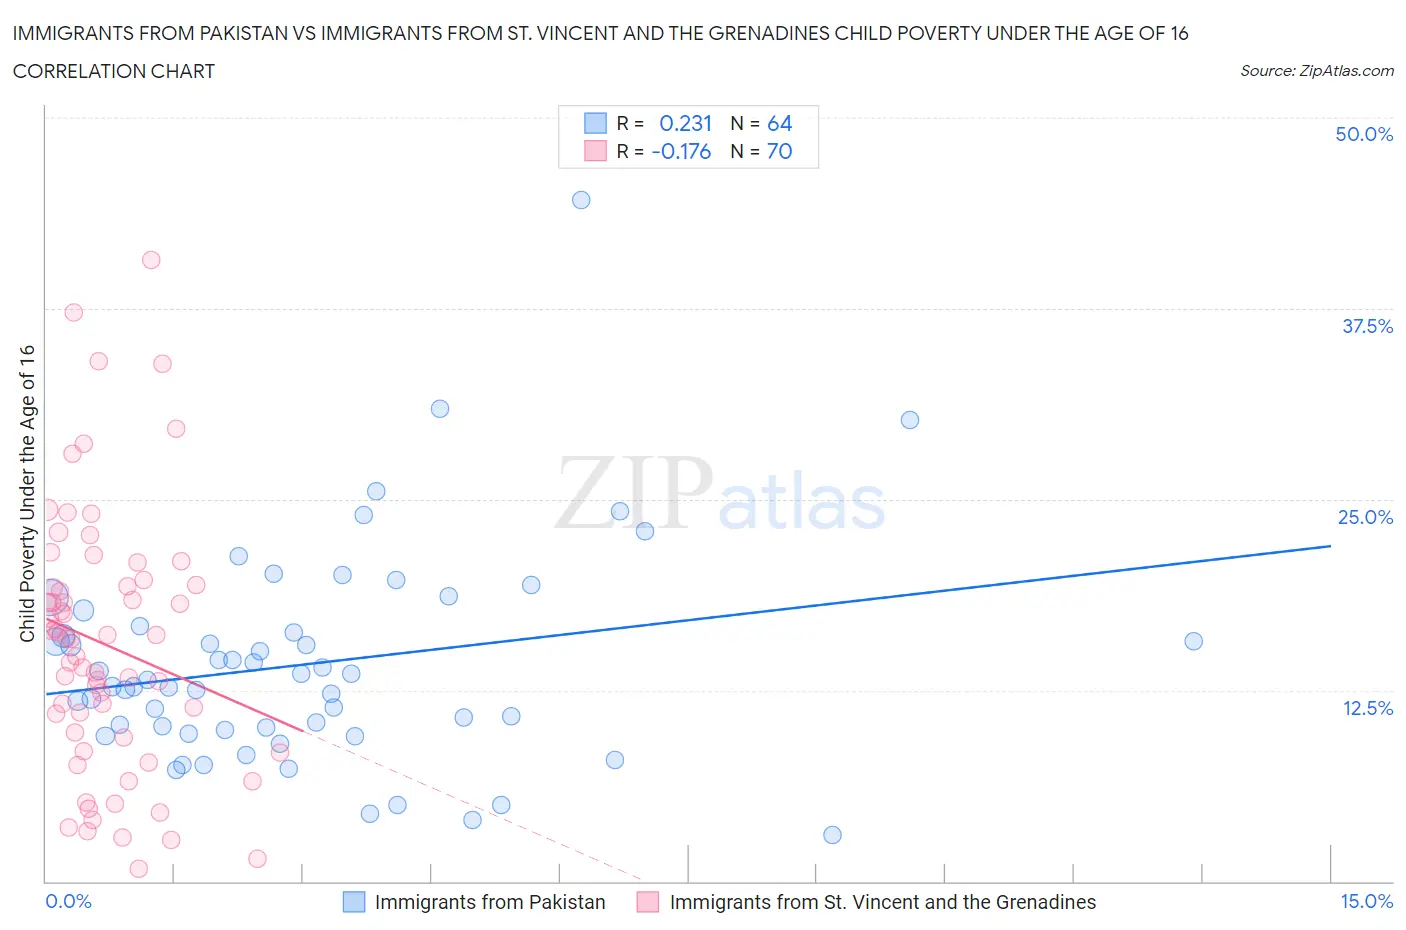 Immigrants from Pakistan vs Immigrants from St. Vincent and the Grenadines Child Poverty Under the Age of 16